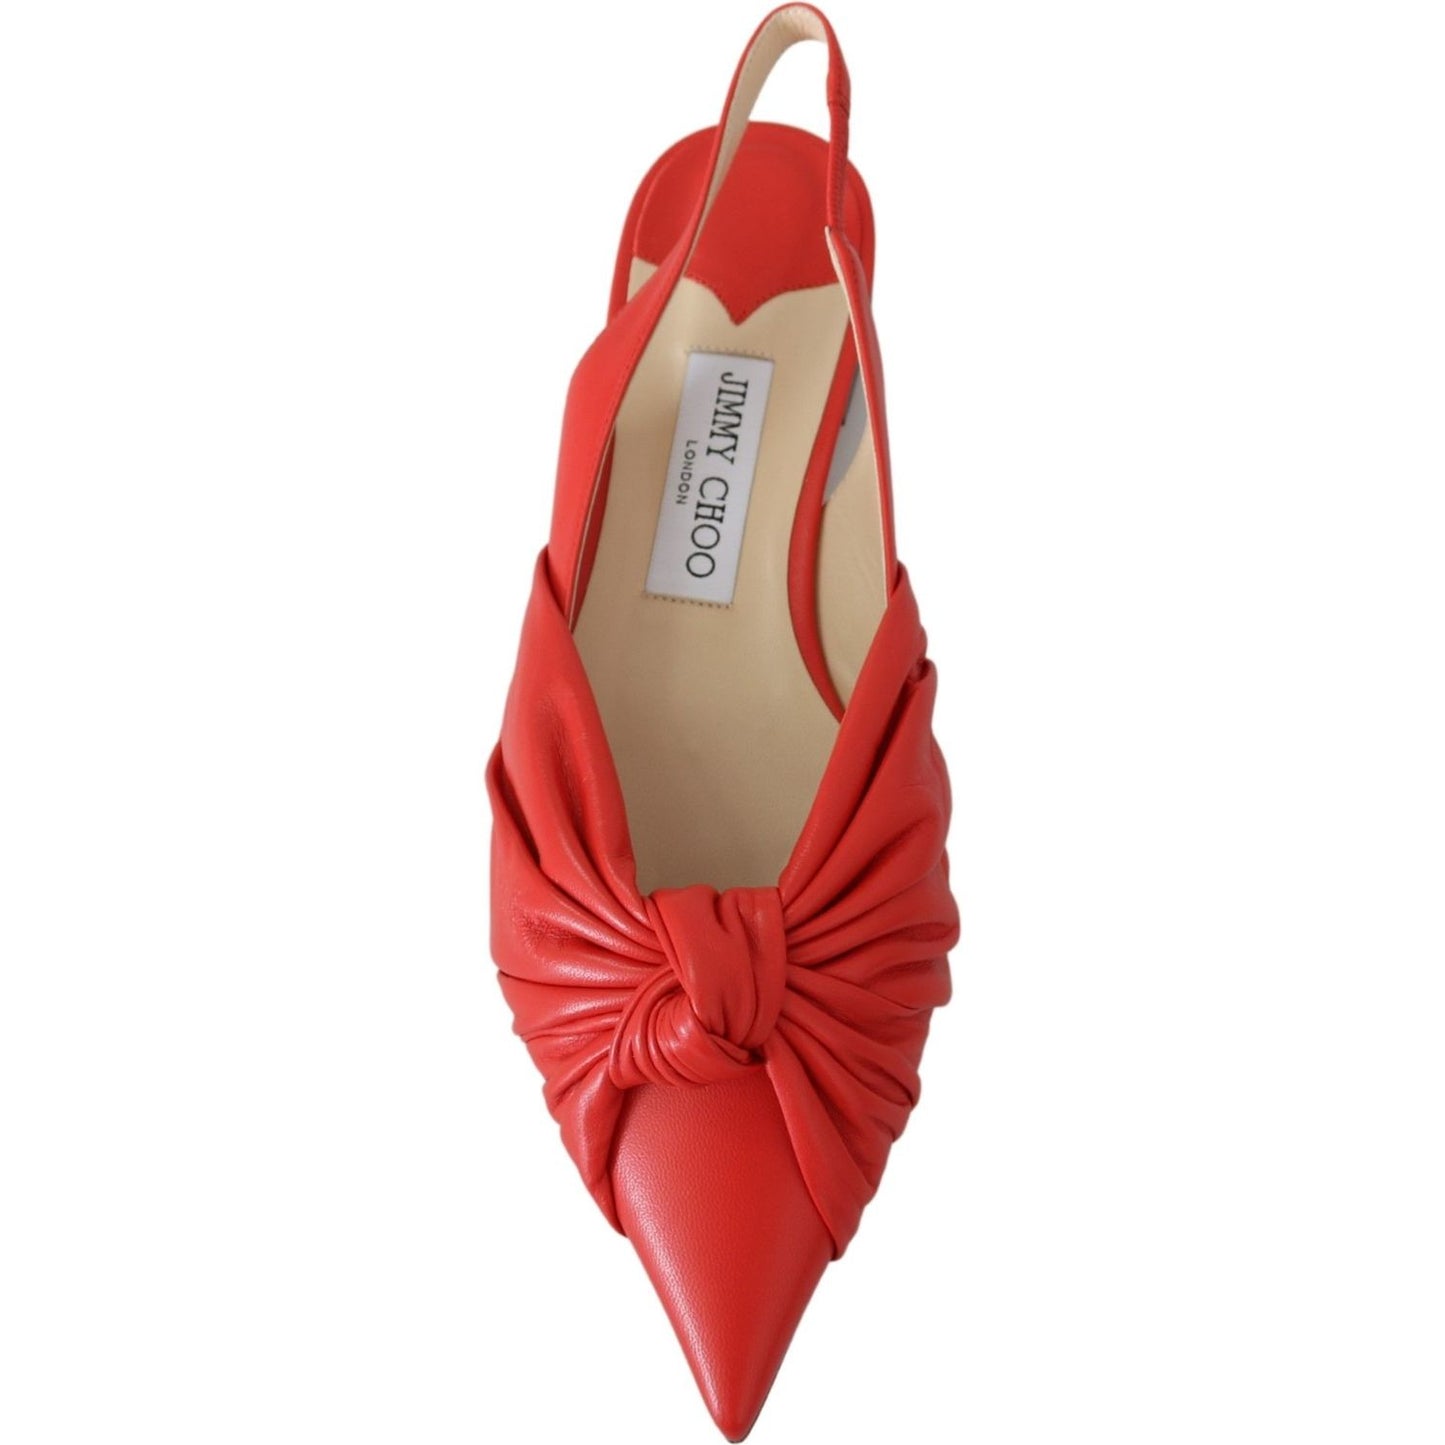 Jimmy Choo Chic Red Pointed Toe Leather Flats annabell-flat-nap-chilli-leather-flat-shoes Shoes IMG_2747-56c026be-3b7.jpg